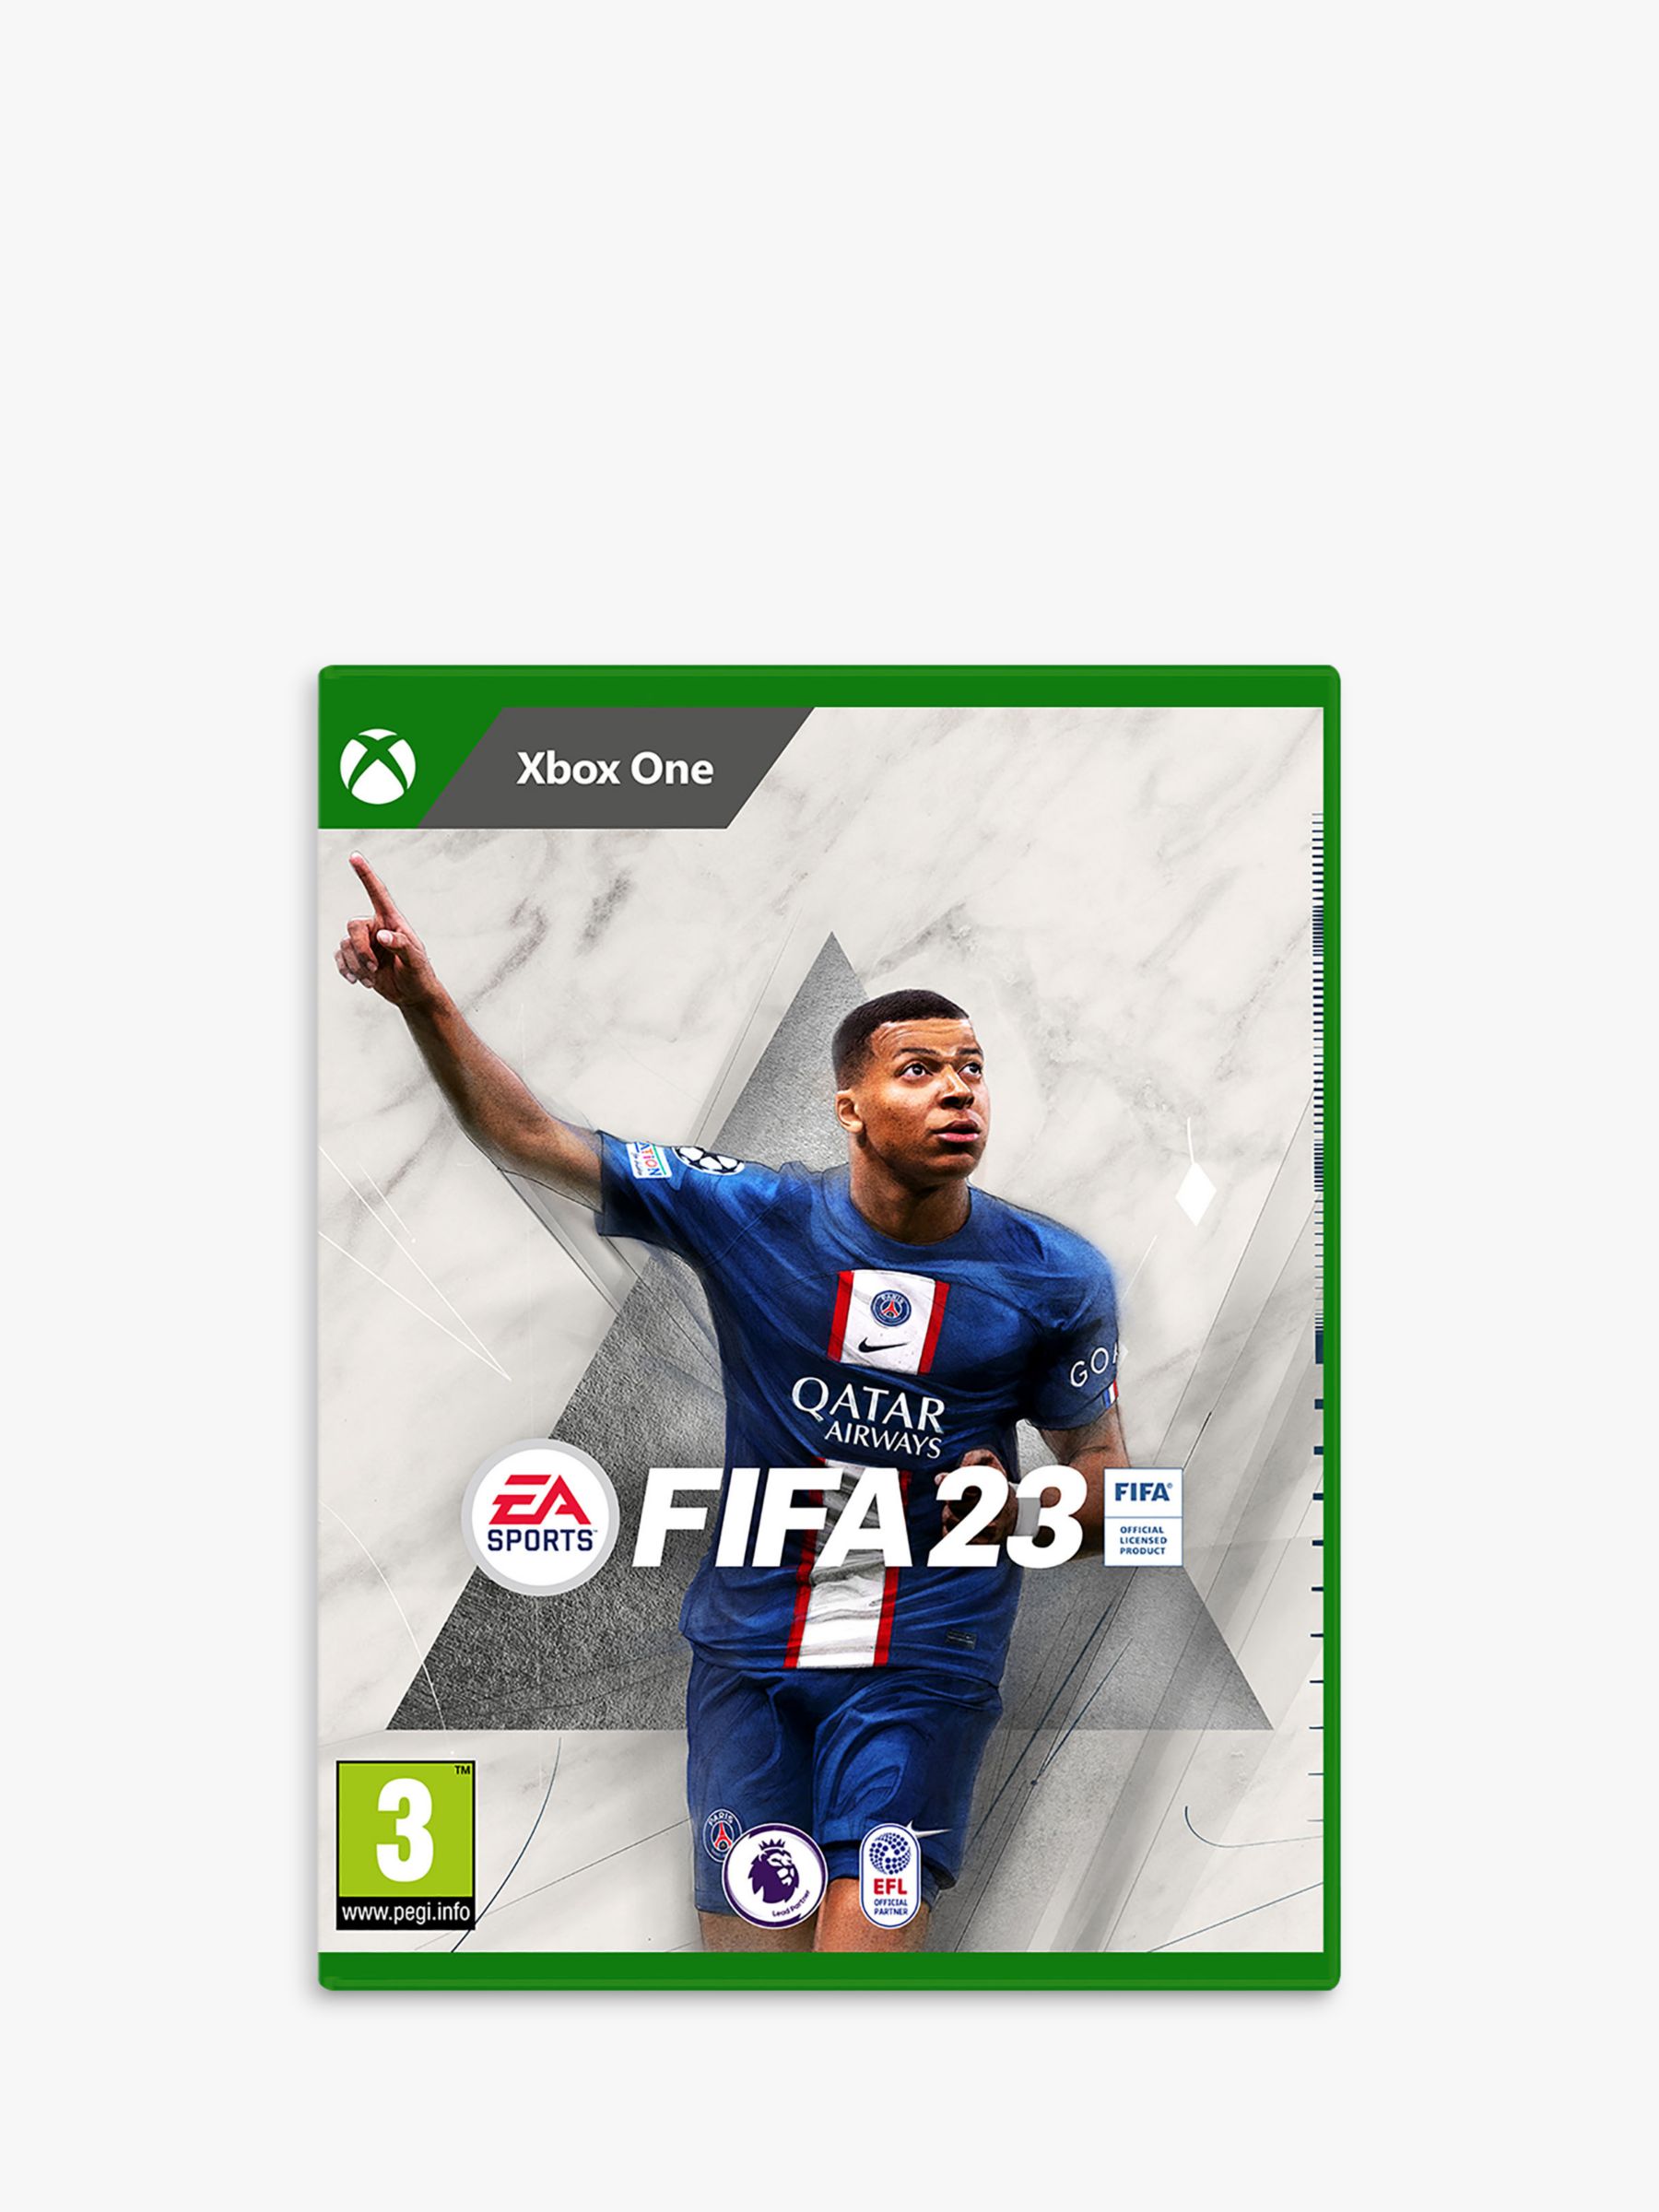 FIFA 23 Download & Review (2023 Latest)